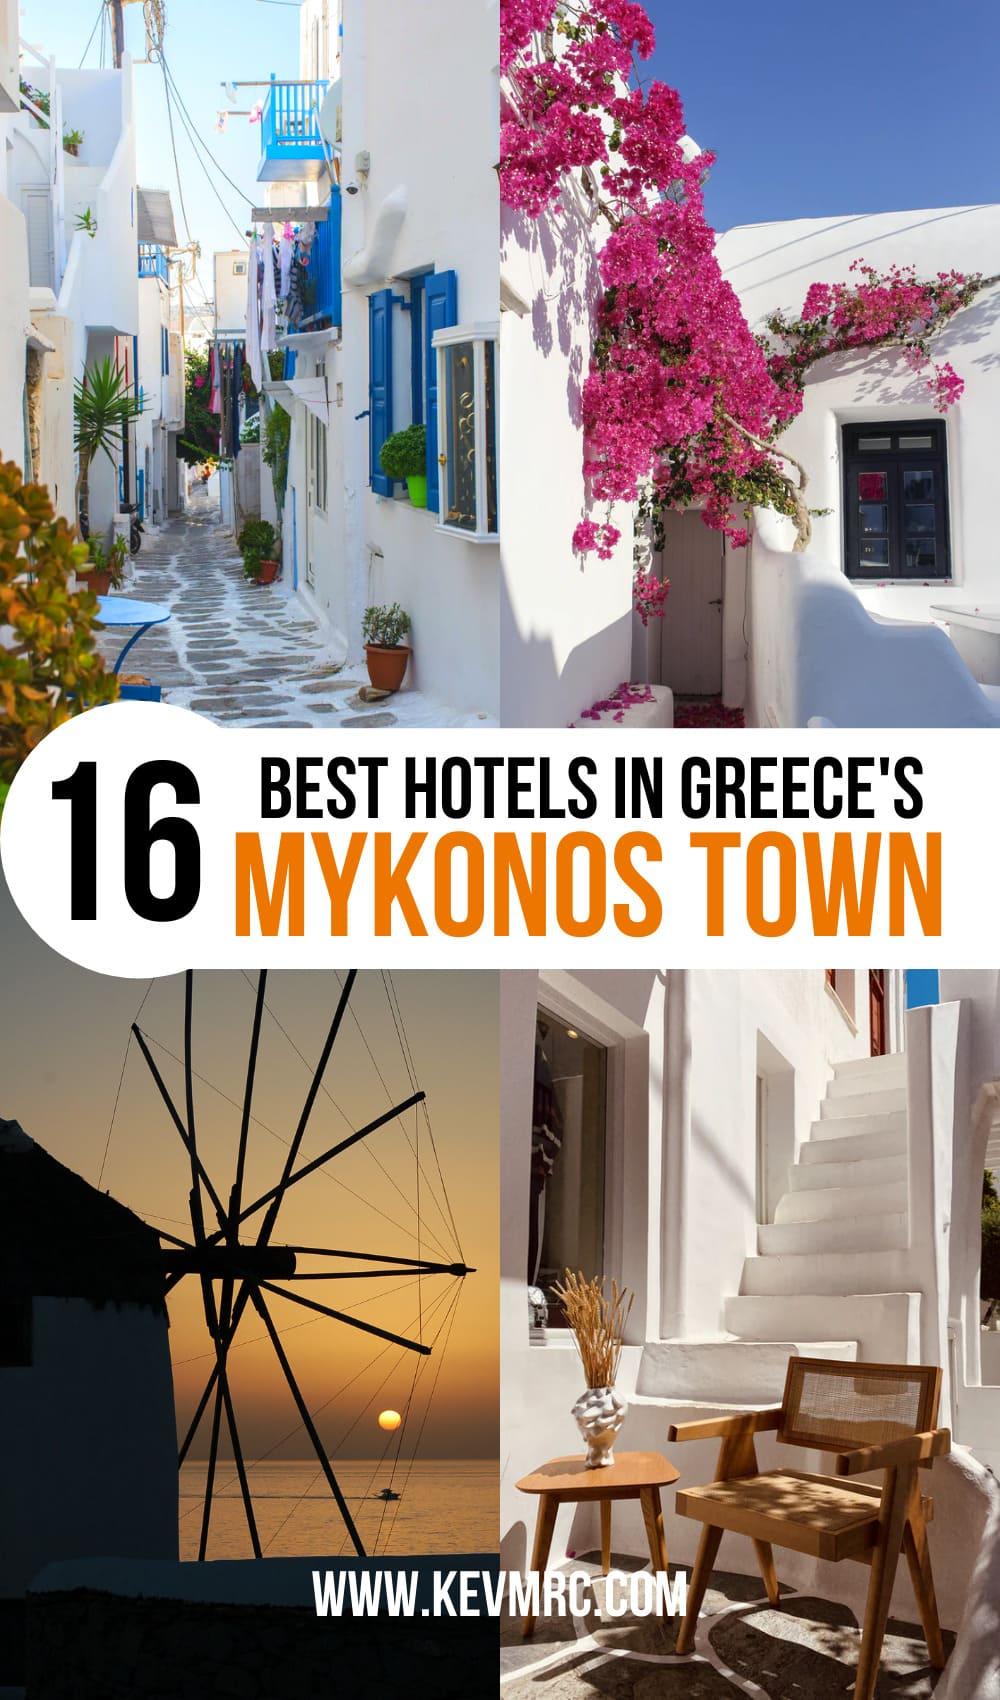 I've selected the 16 best hotels in Mykonos Town and listed them by category so you can easily find the best place for you. best hotels in mykonos town | cavo tagoo mykonos | mykonos town hotels | best mykonos hotels | mykonos hotel 